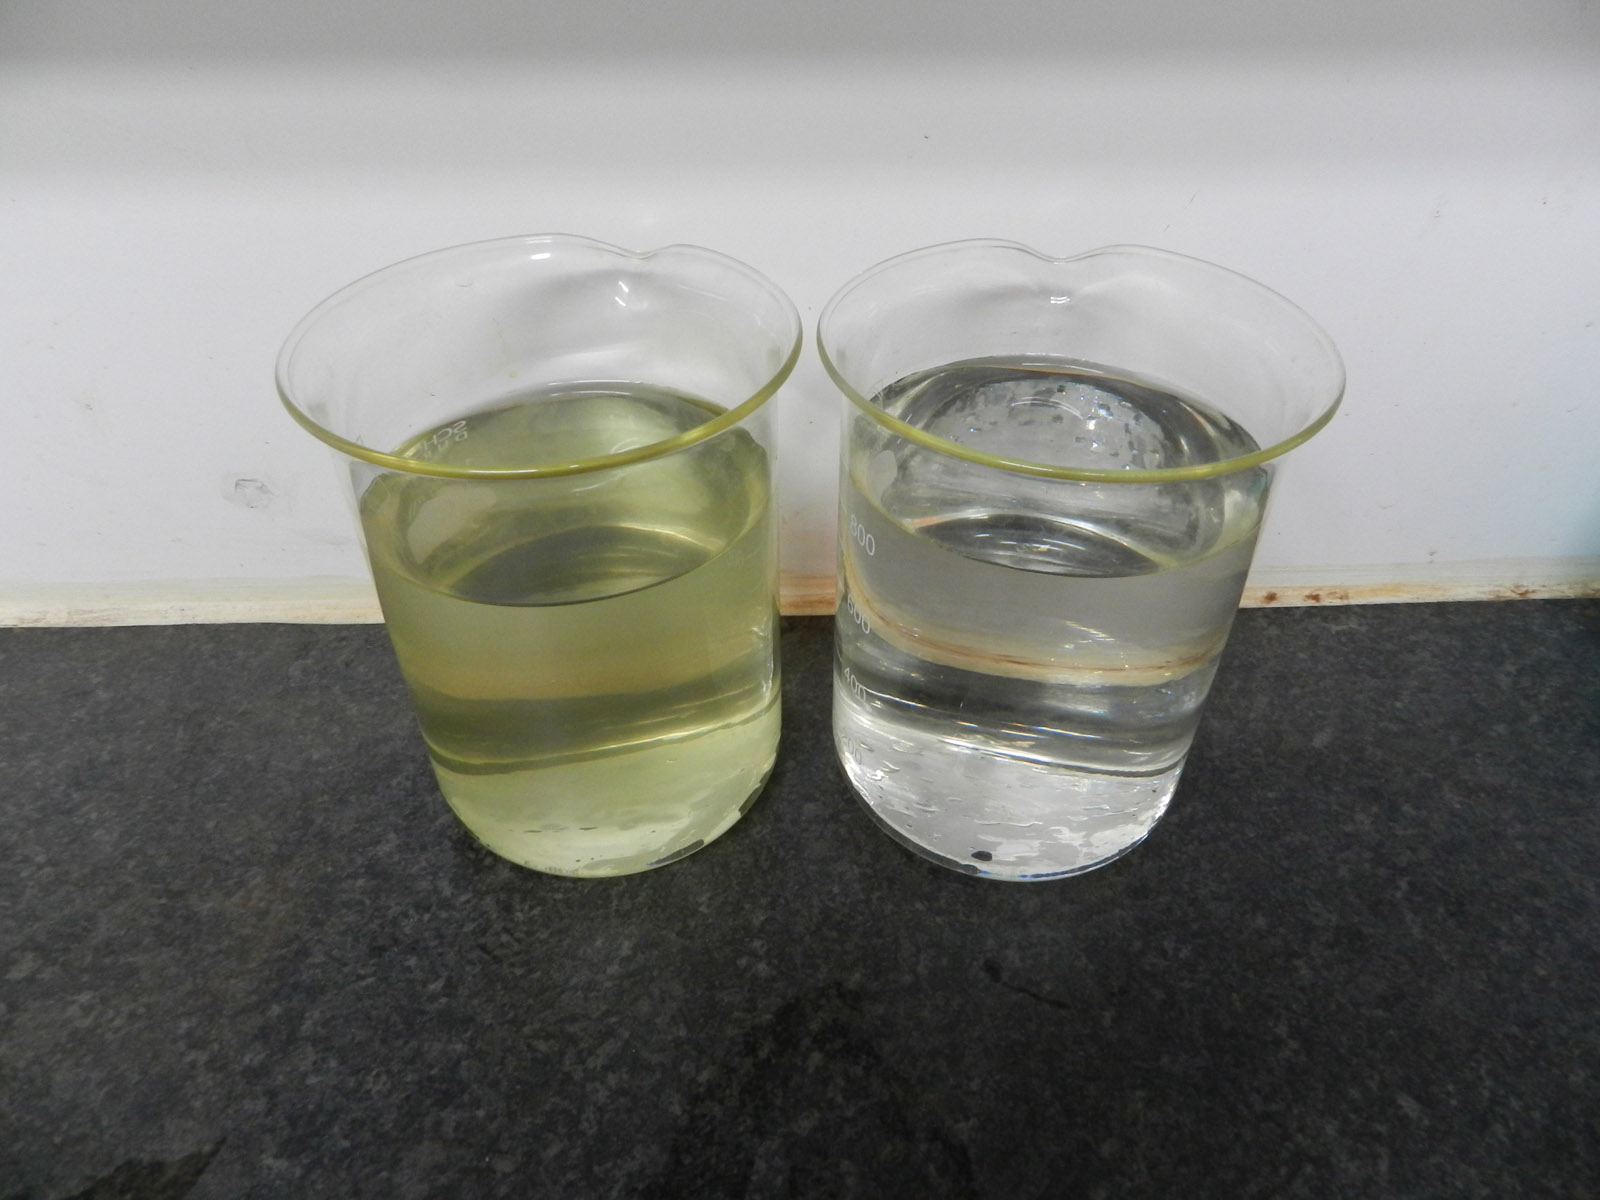 The water before treatment (left) and after (right).